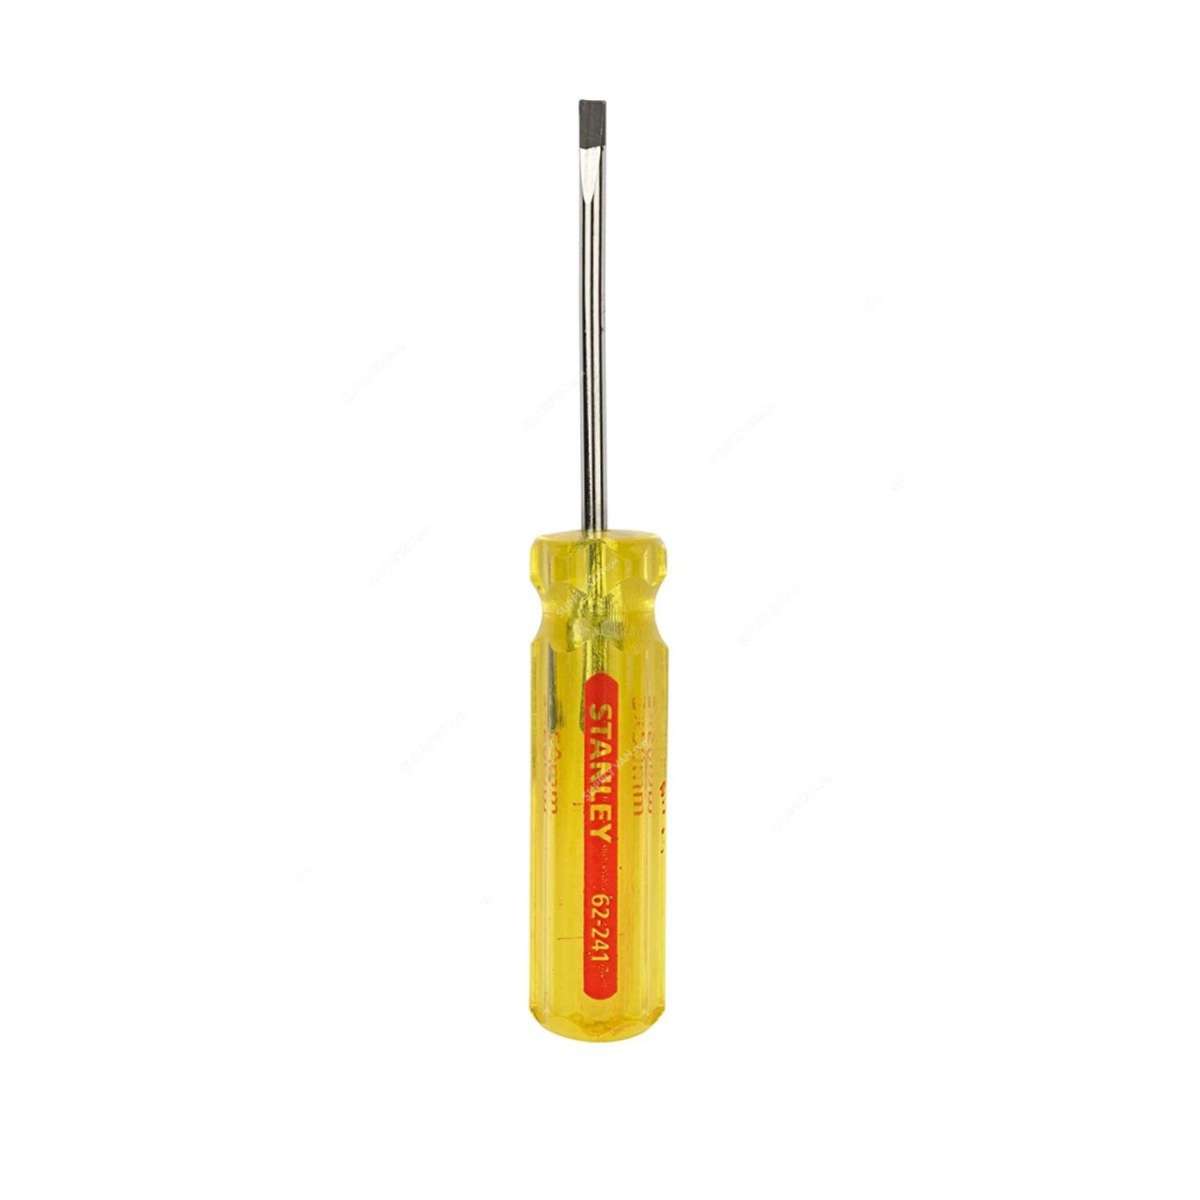 Stanley 62-241-8 3 x 50mm Fix Bar Slotted Screwdriver 1